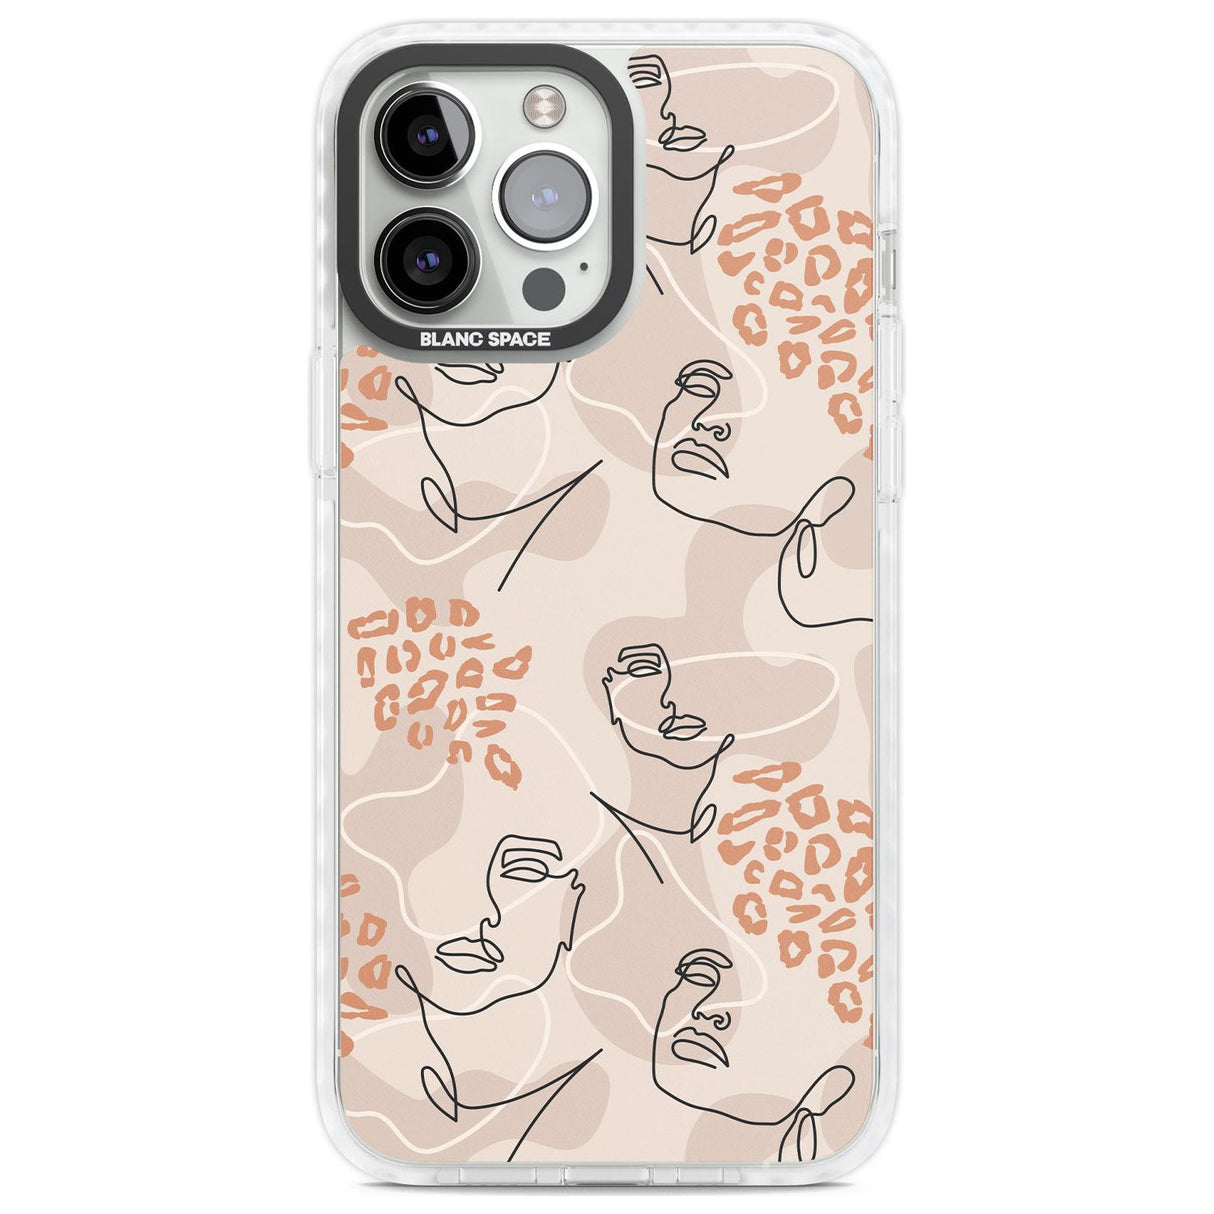 Leopard Print Stylish Abstract Faces Phone Case iPhone 13 Pro Max / Impact Case,iPhone 14 Pro Max / Impact Case Blanc Space